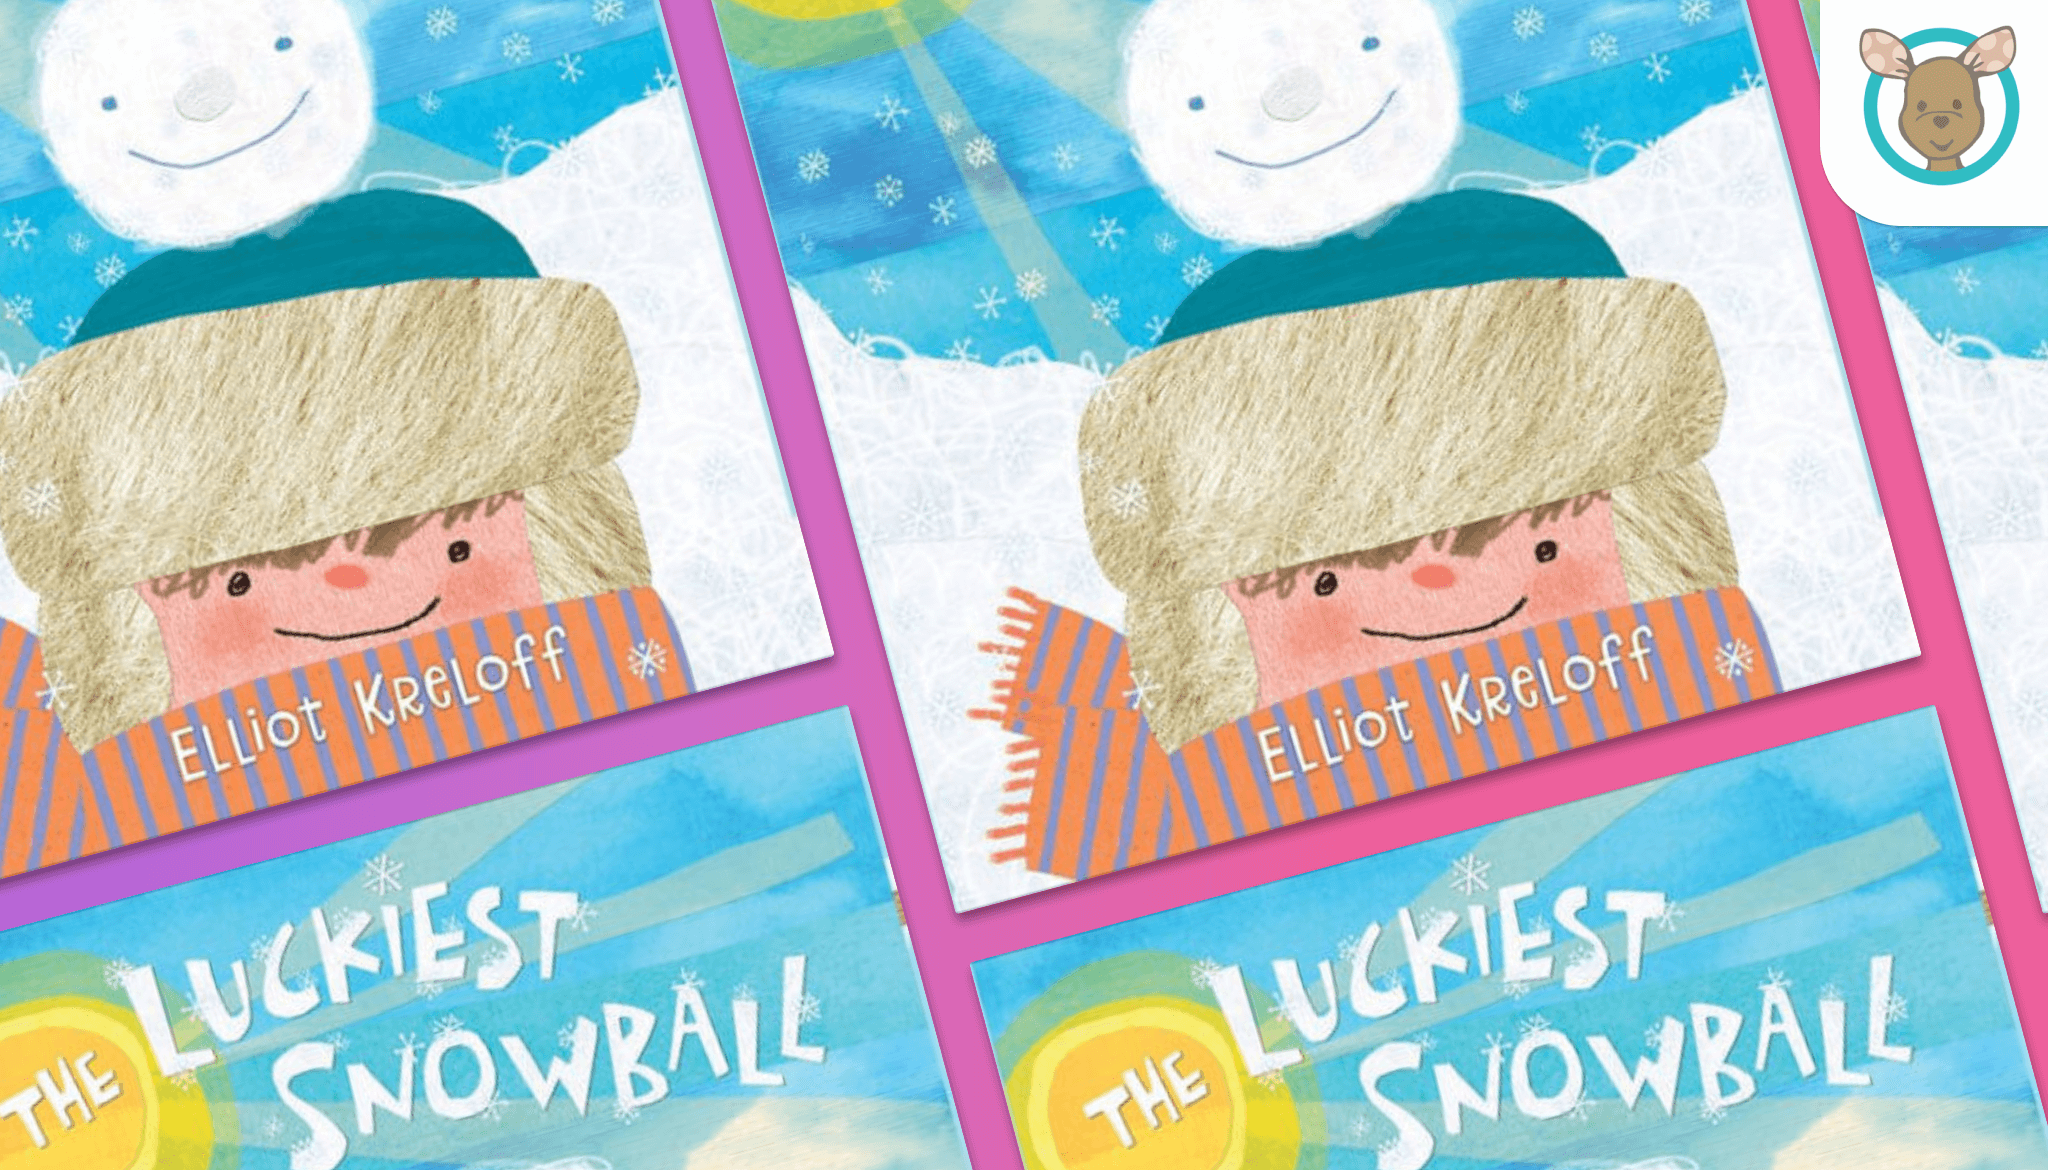 Storytime With Elliot Kreloff: The Luckiest Snowball